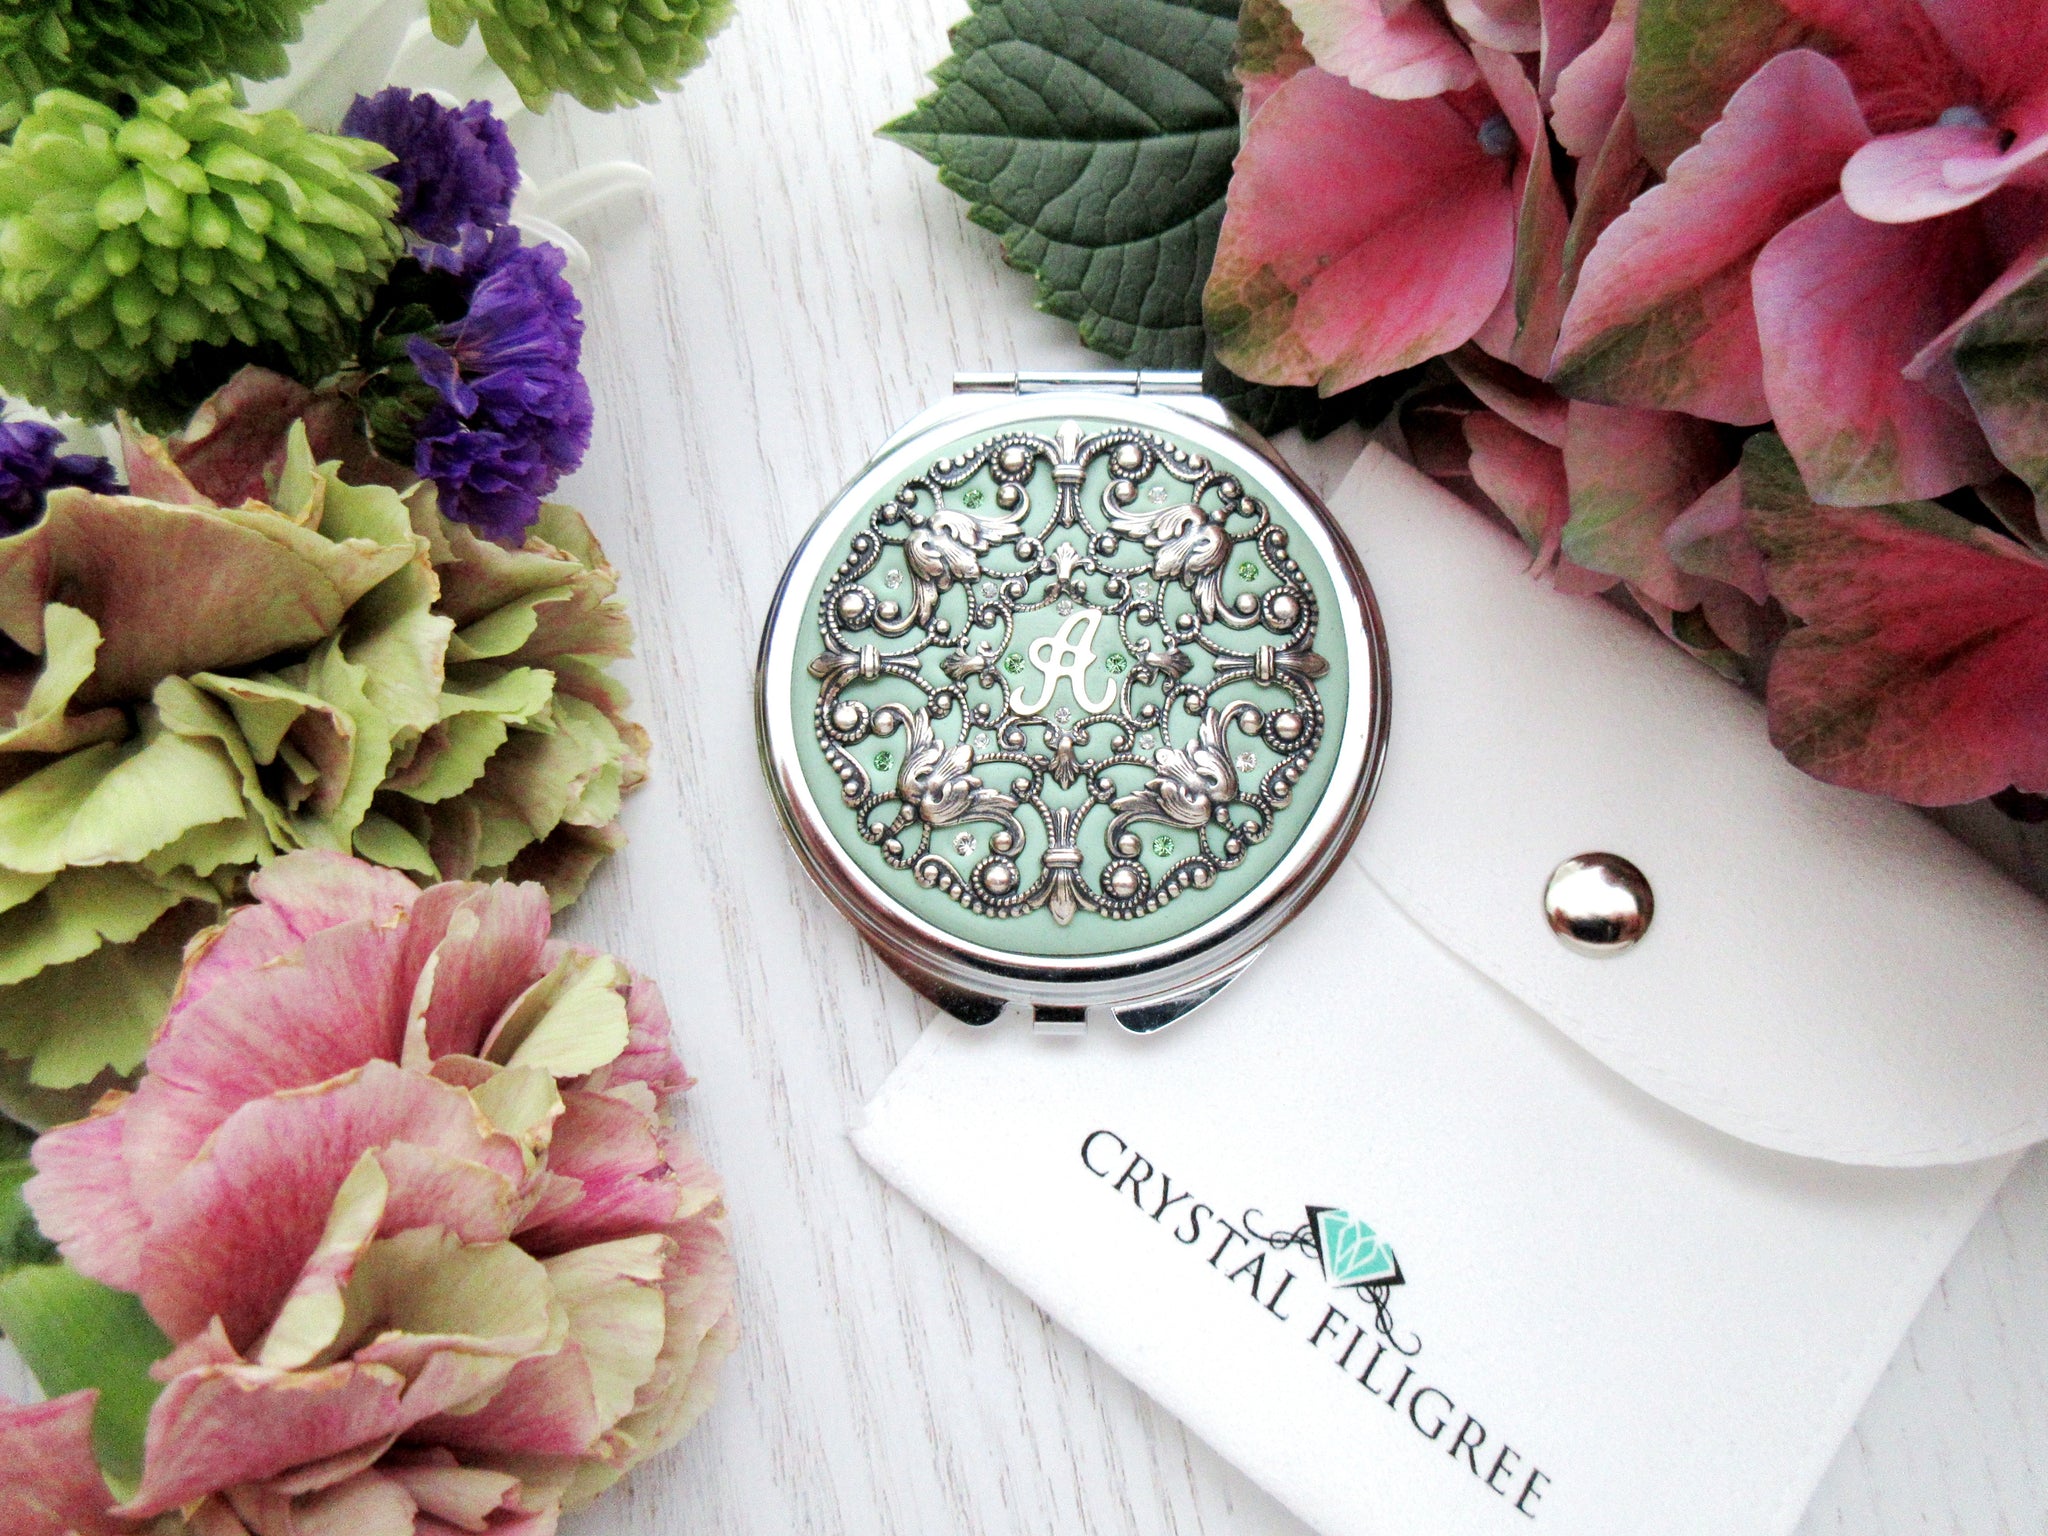 Personalized Compact Mirror - Crystal Filigree